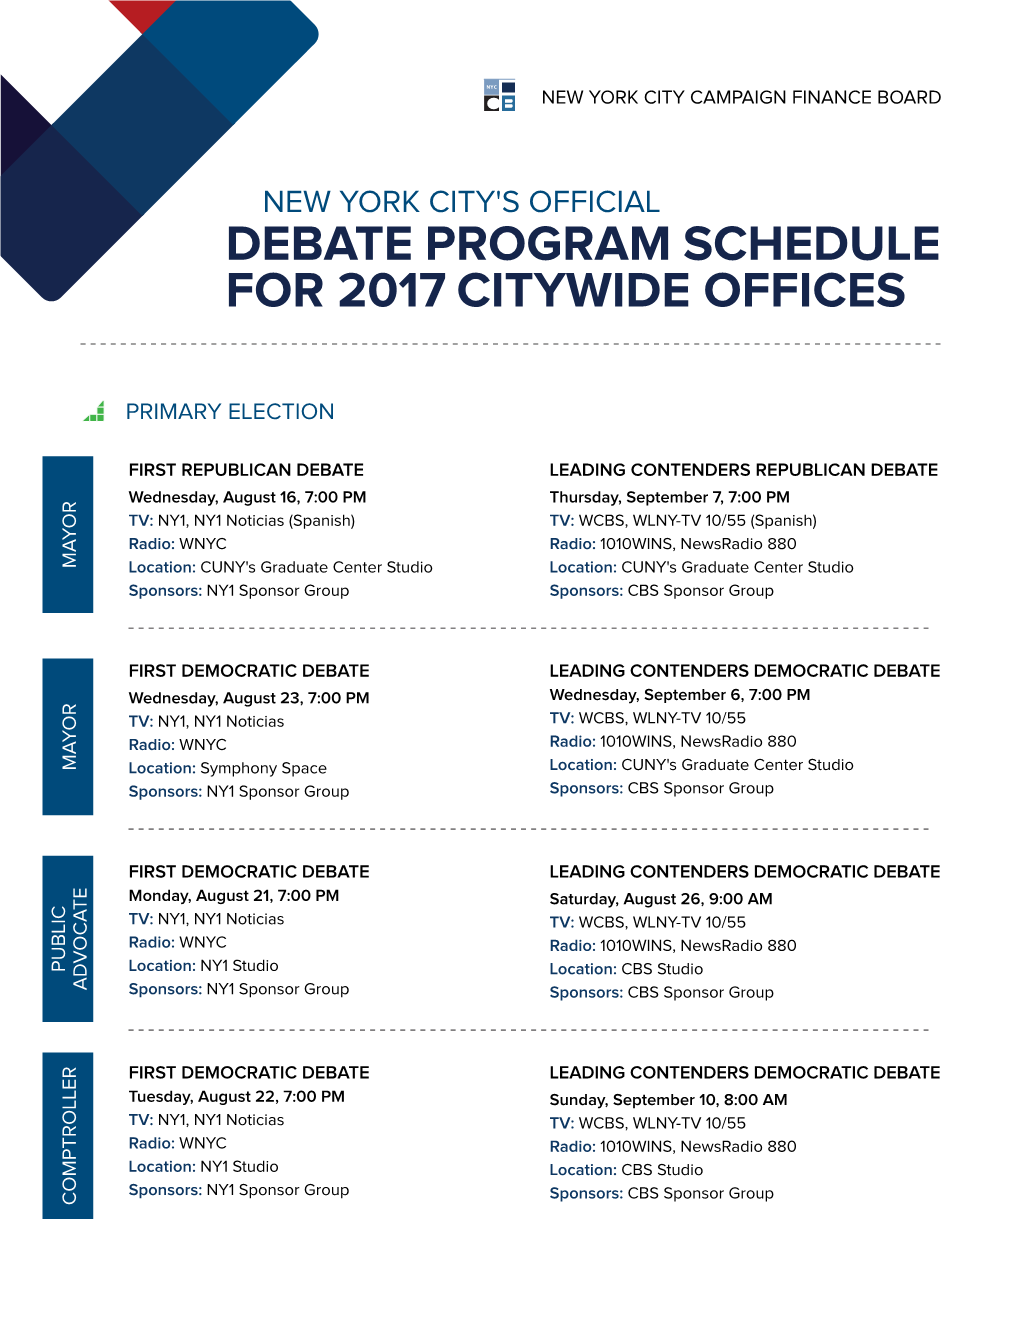 Debate Program Schedule for 2017 Citywide Offices